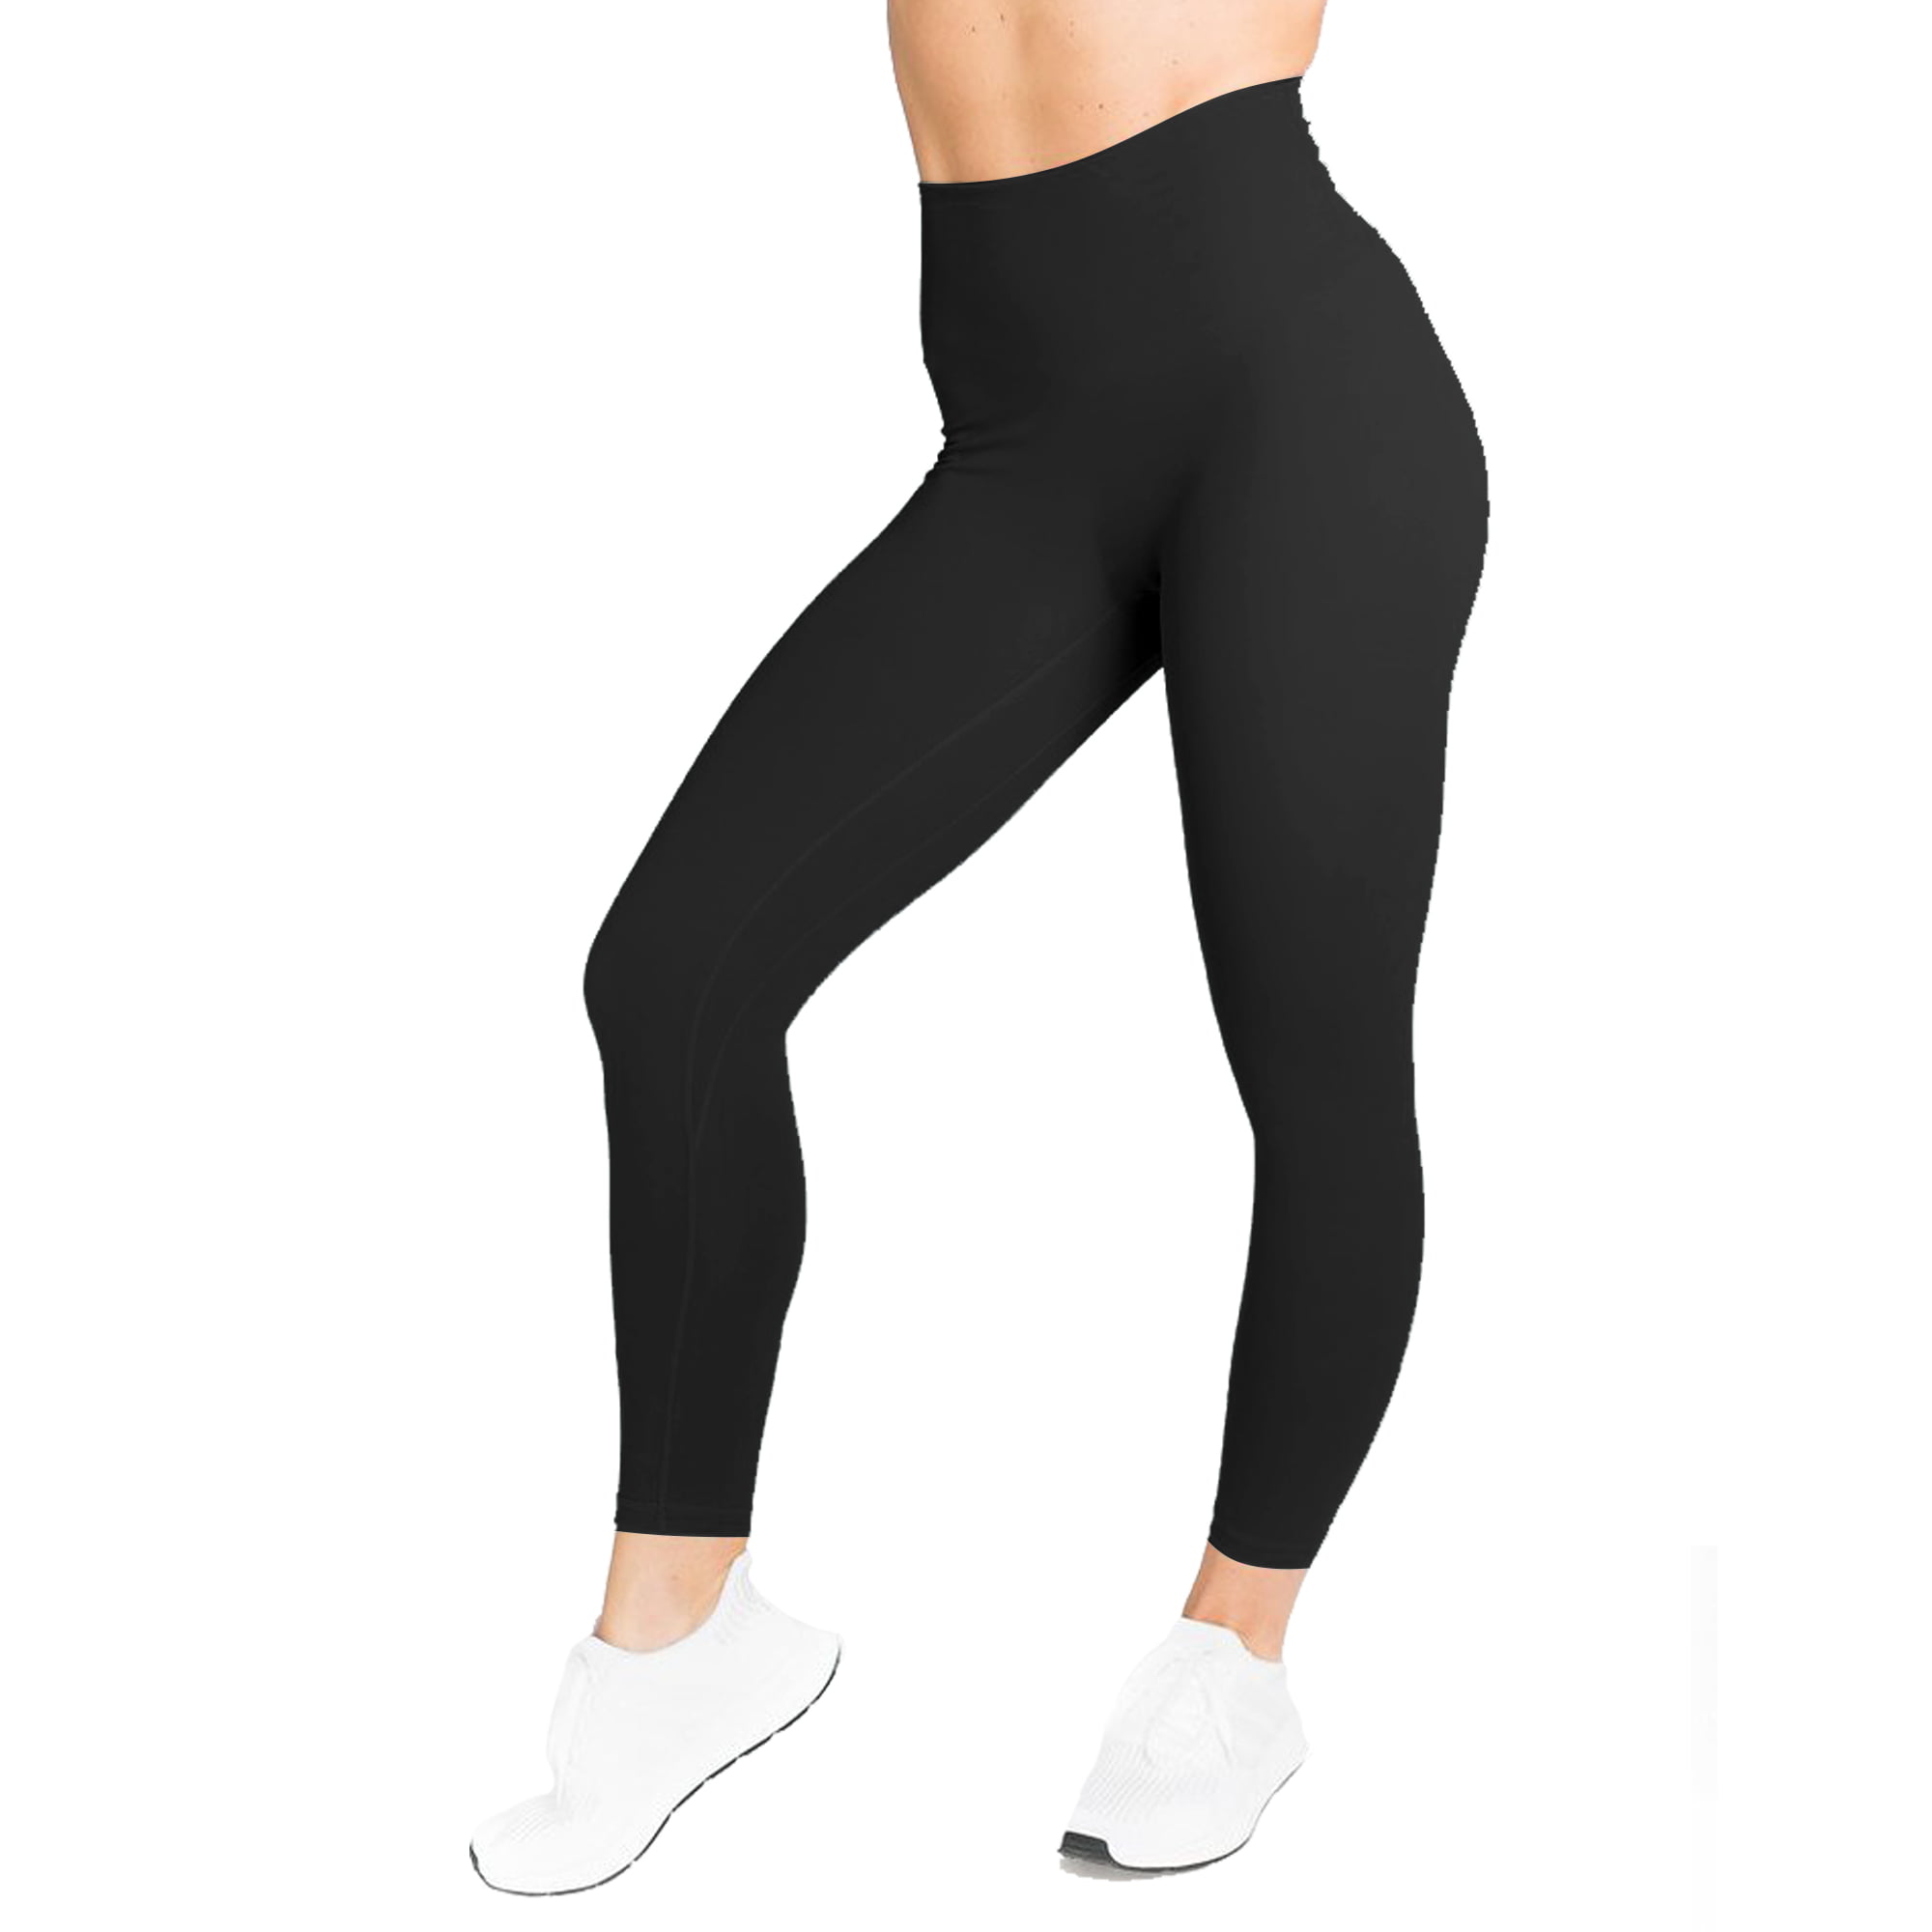 Yoga Pants Women Workout Sport High Waisted Legging Fitness Seamless Tights  Workout Activewear For Running, Gym and Kicking, Black-XS